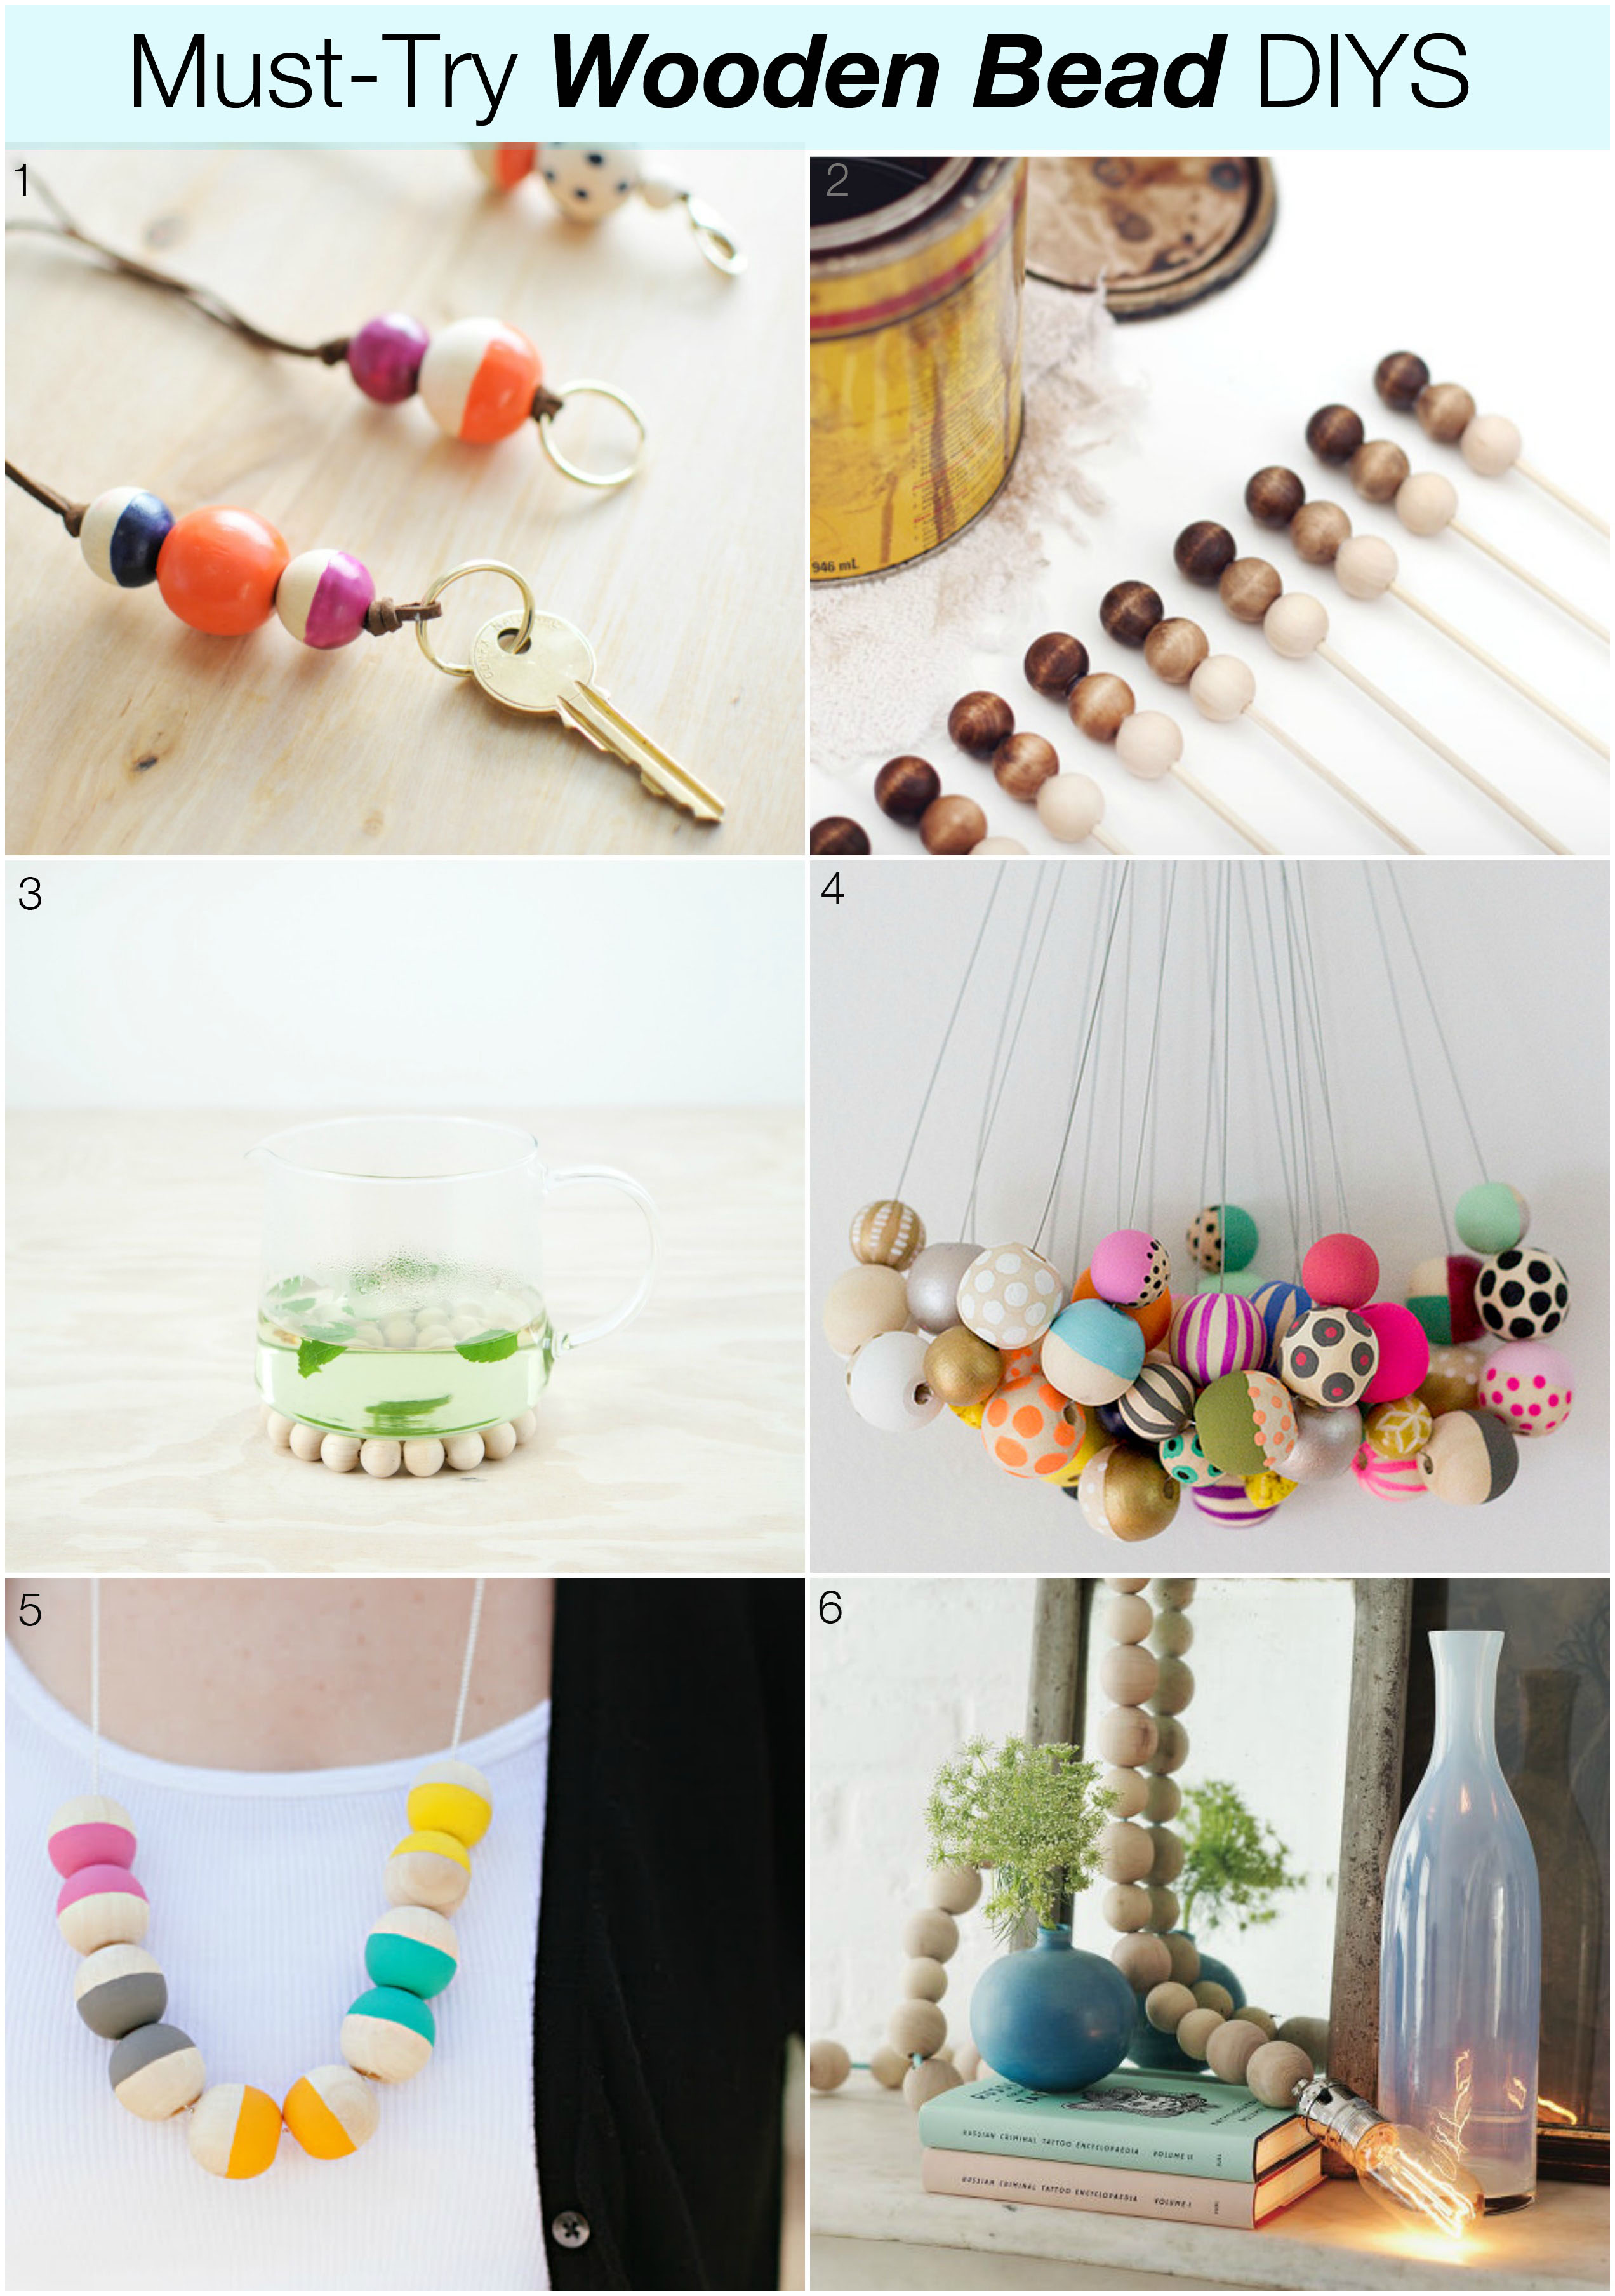 Inspiration of the Week: Wooden Beads - The Crafted Life